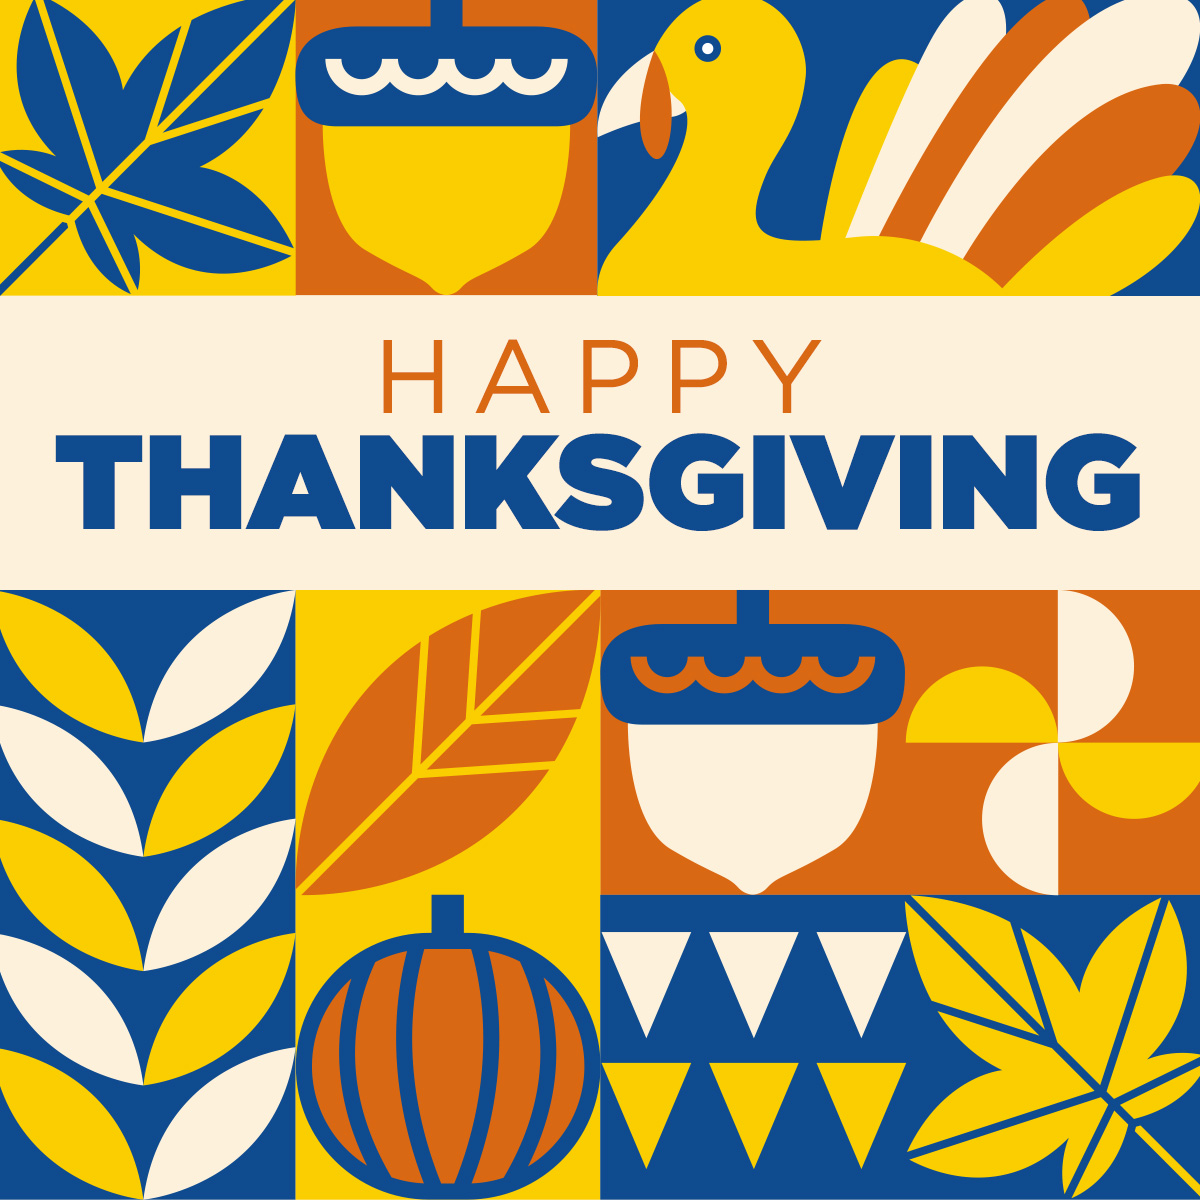 On this special day for giving thanks, we are grateful for our Nation's service members, military spouses, veterans and their families. Wishing all a wonderful #Thanksgiving!